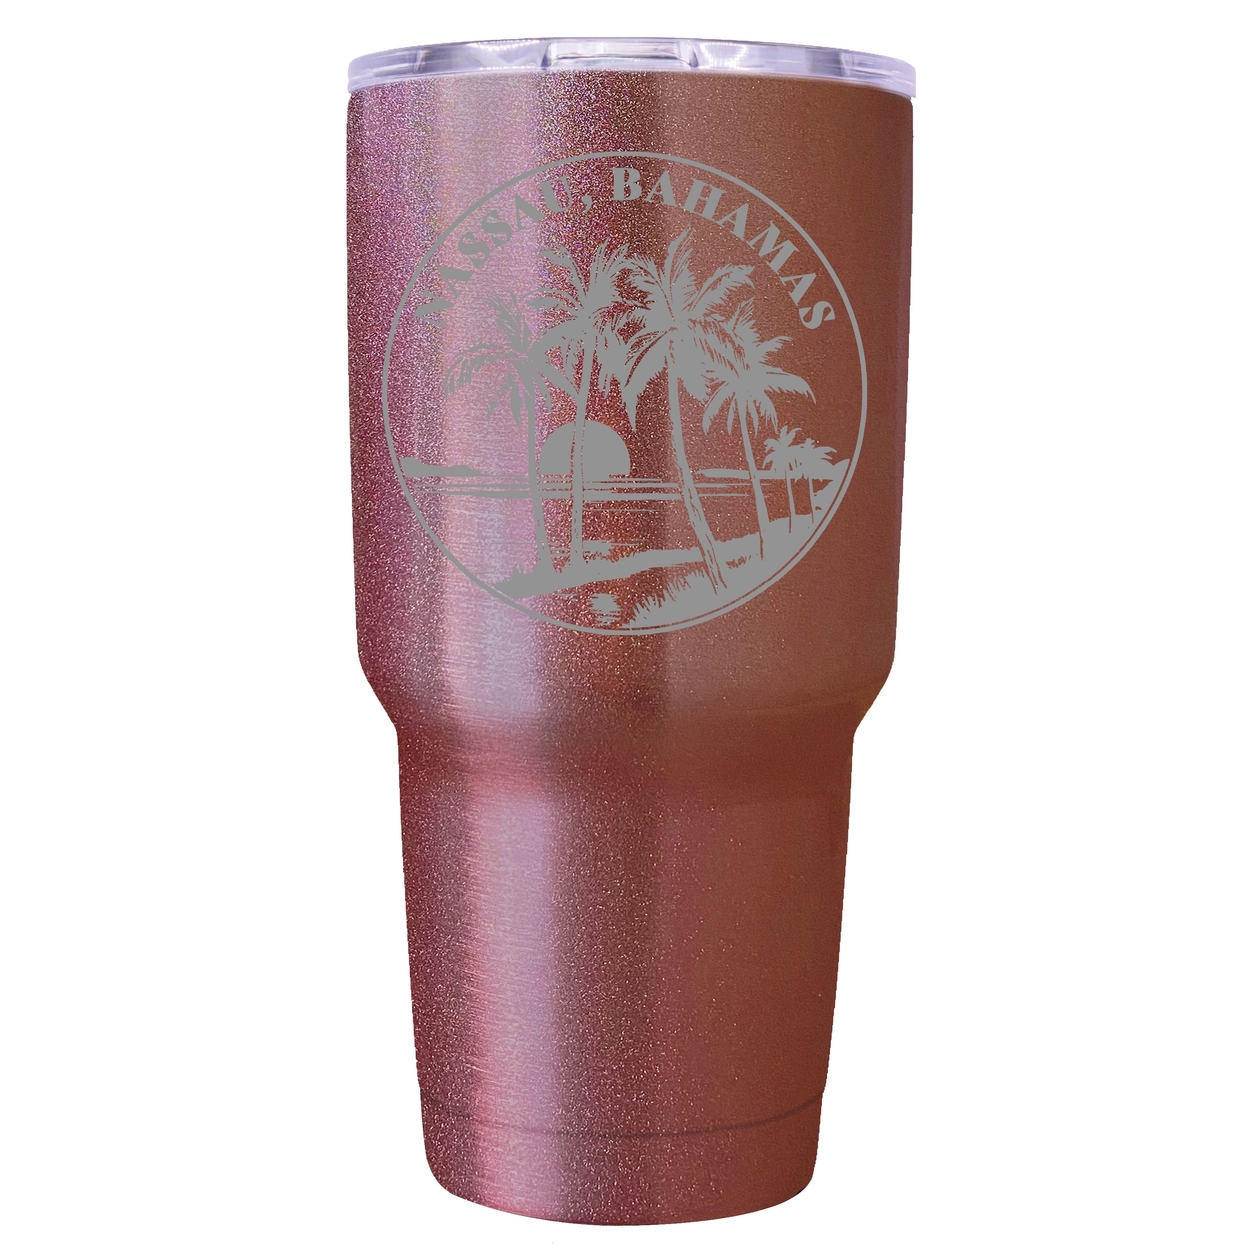 Nassau The Bahamas Souvenir 24 Oz Engraved Insulated Stainless Steel Tumbler - Black,,2-Pack